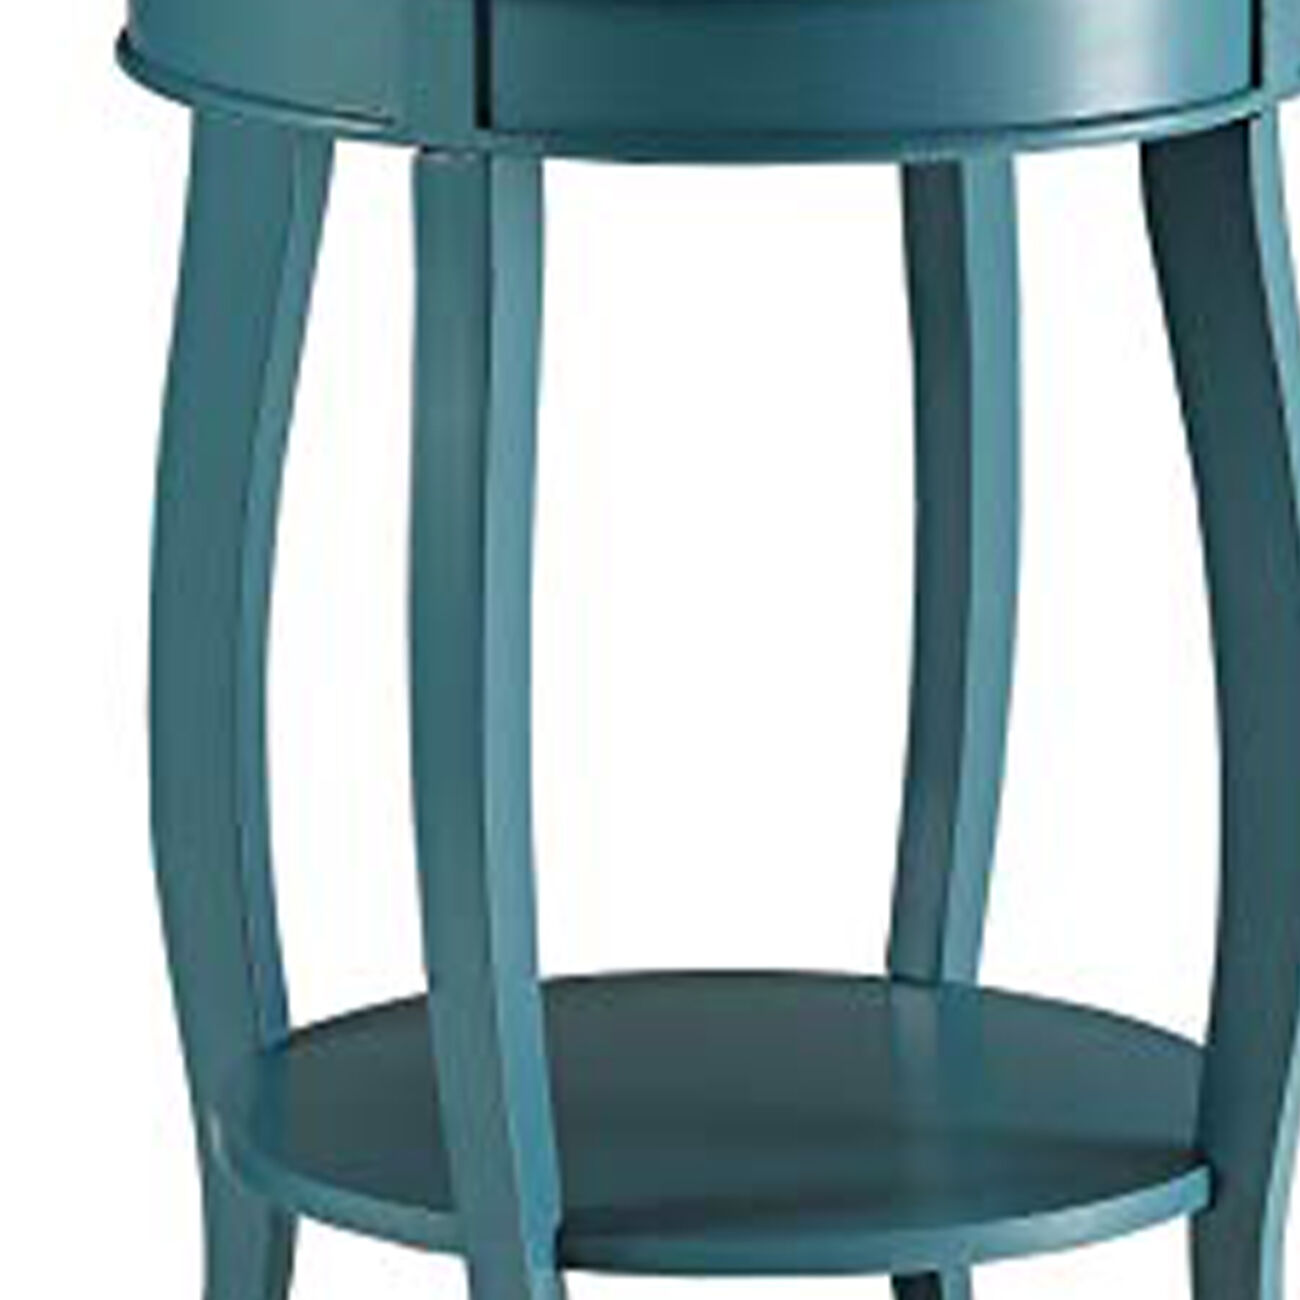 Affiable Side Table, Teal Blue